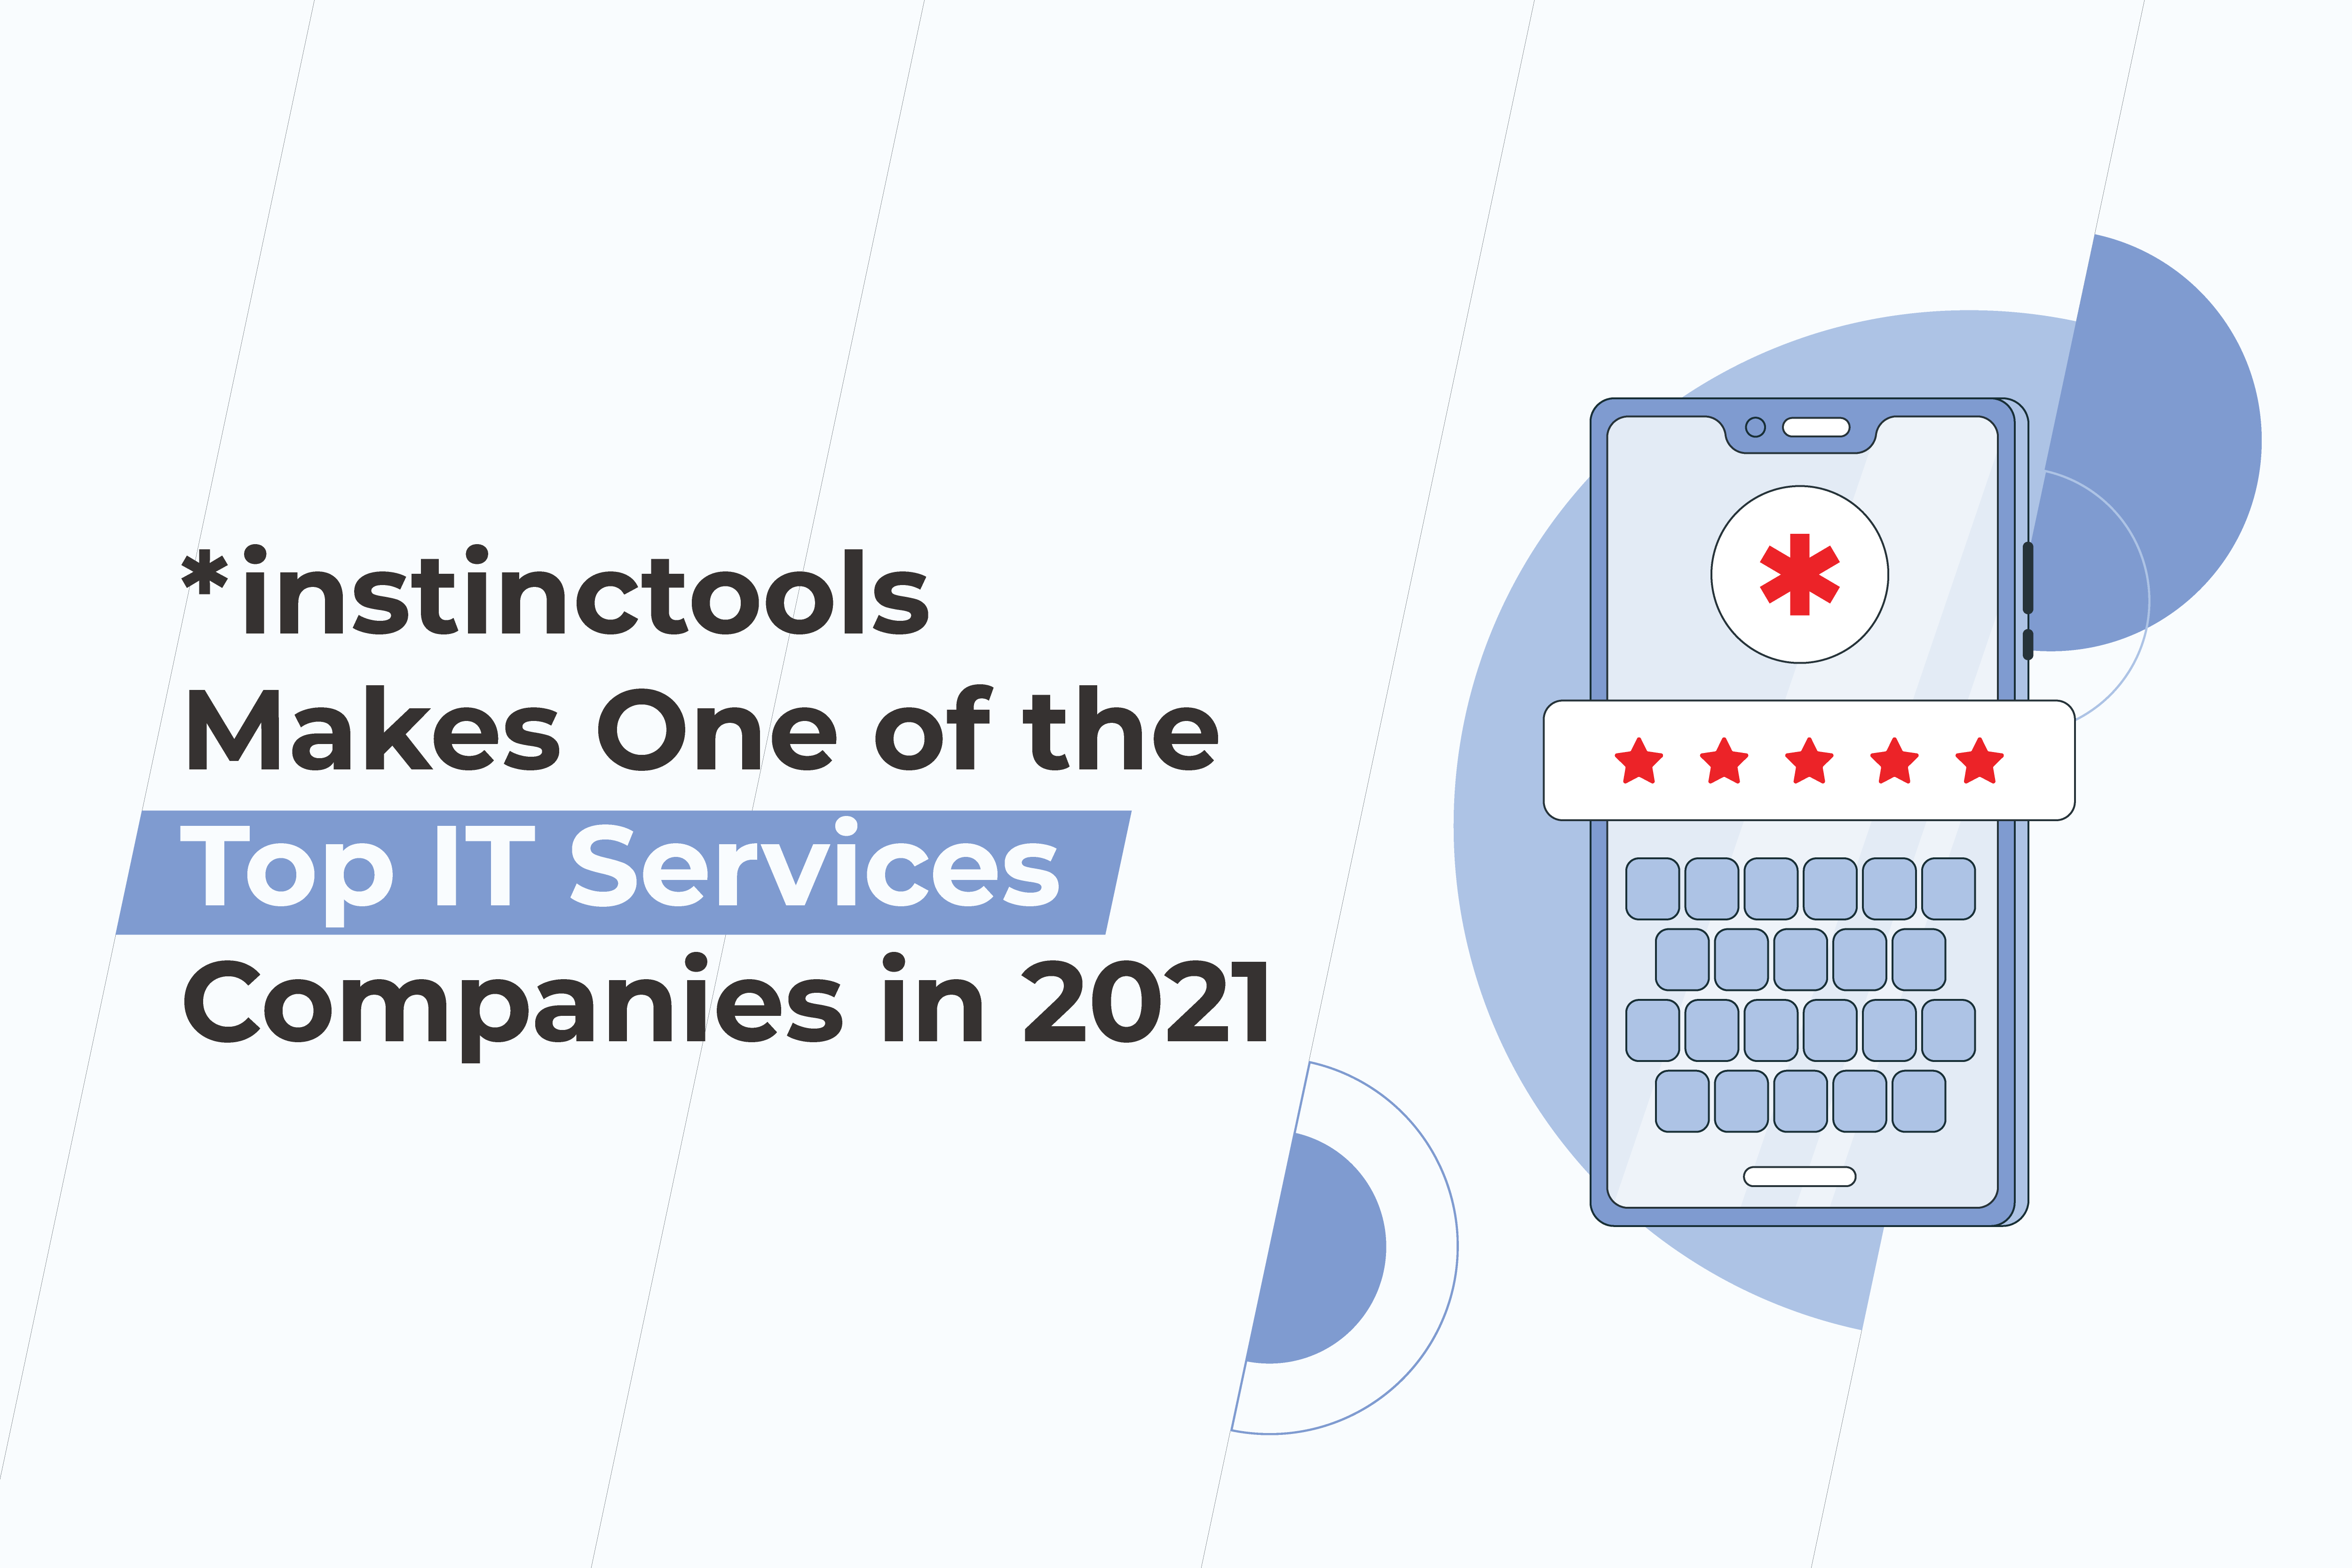 *instinctools Makes One of the Top IT Services Companies in 2021